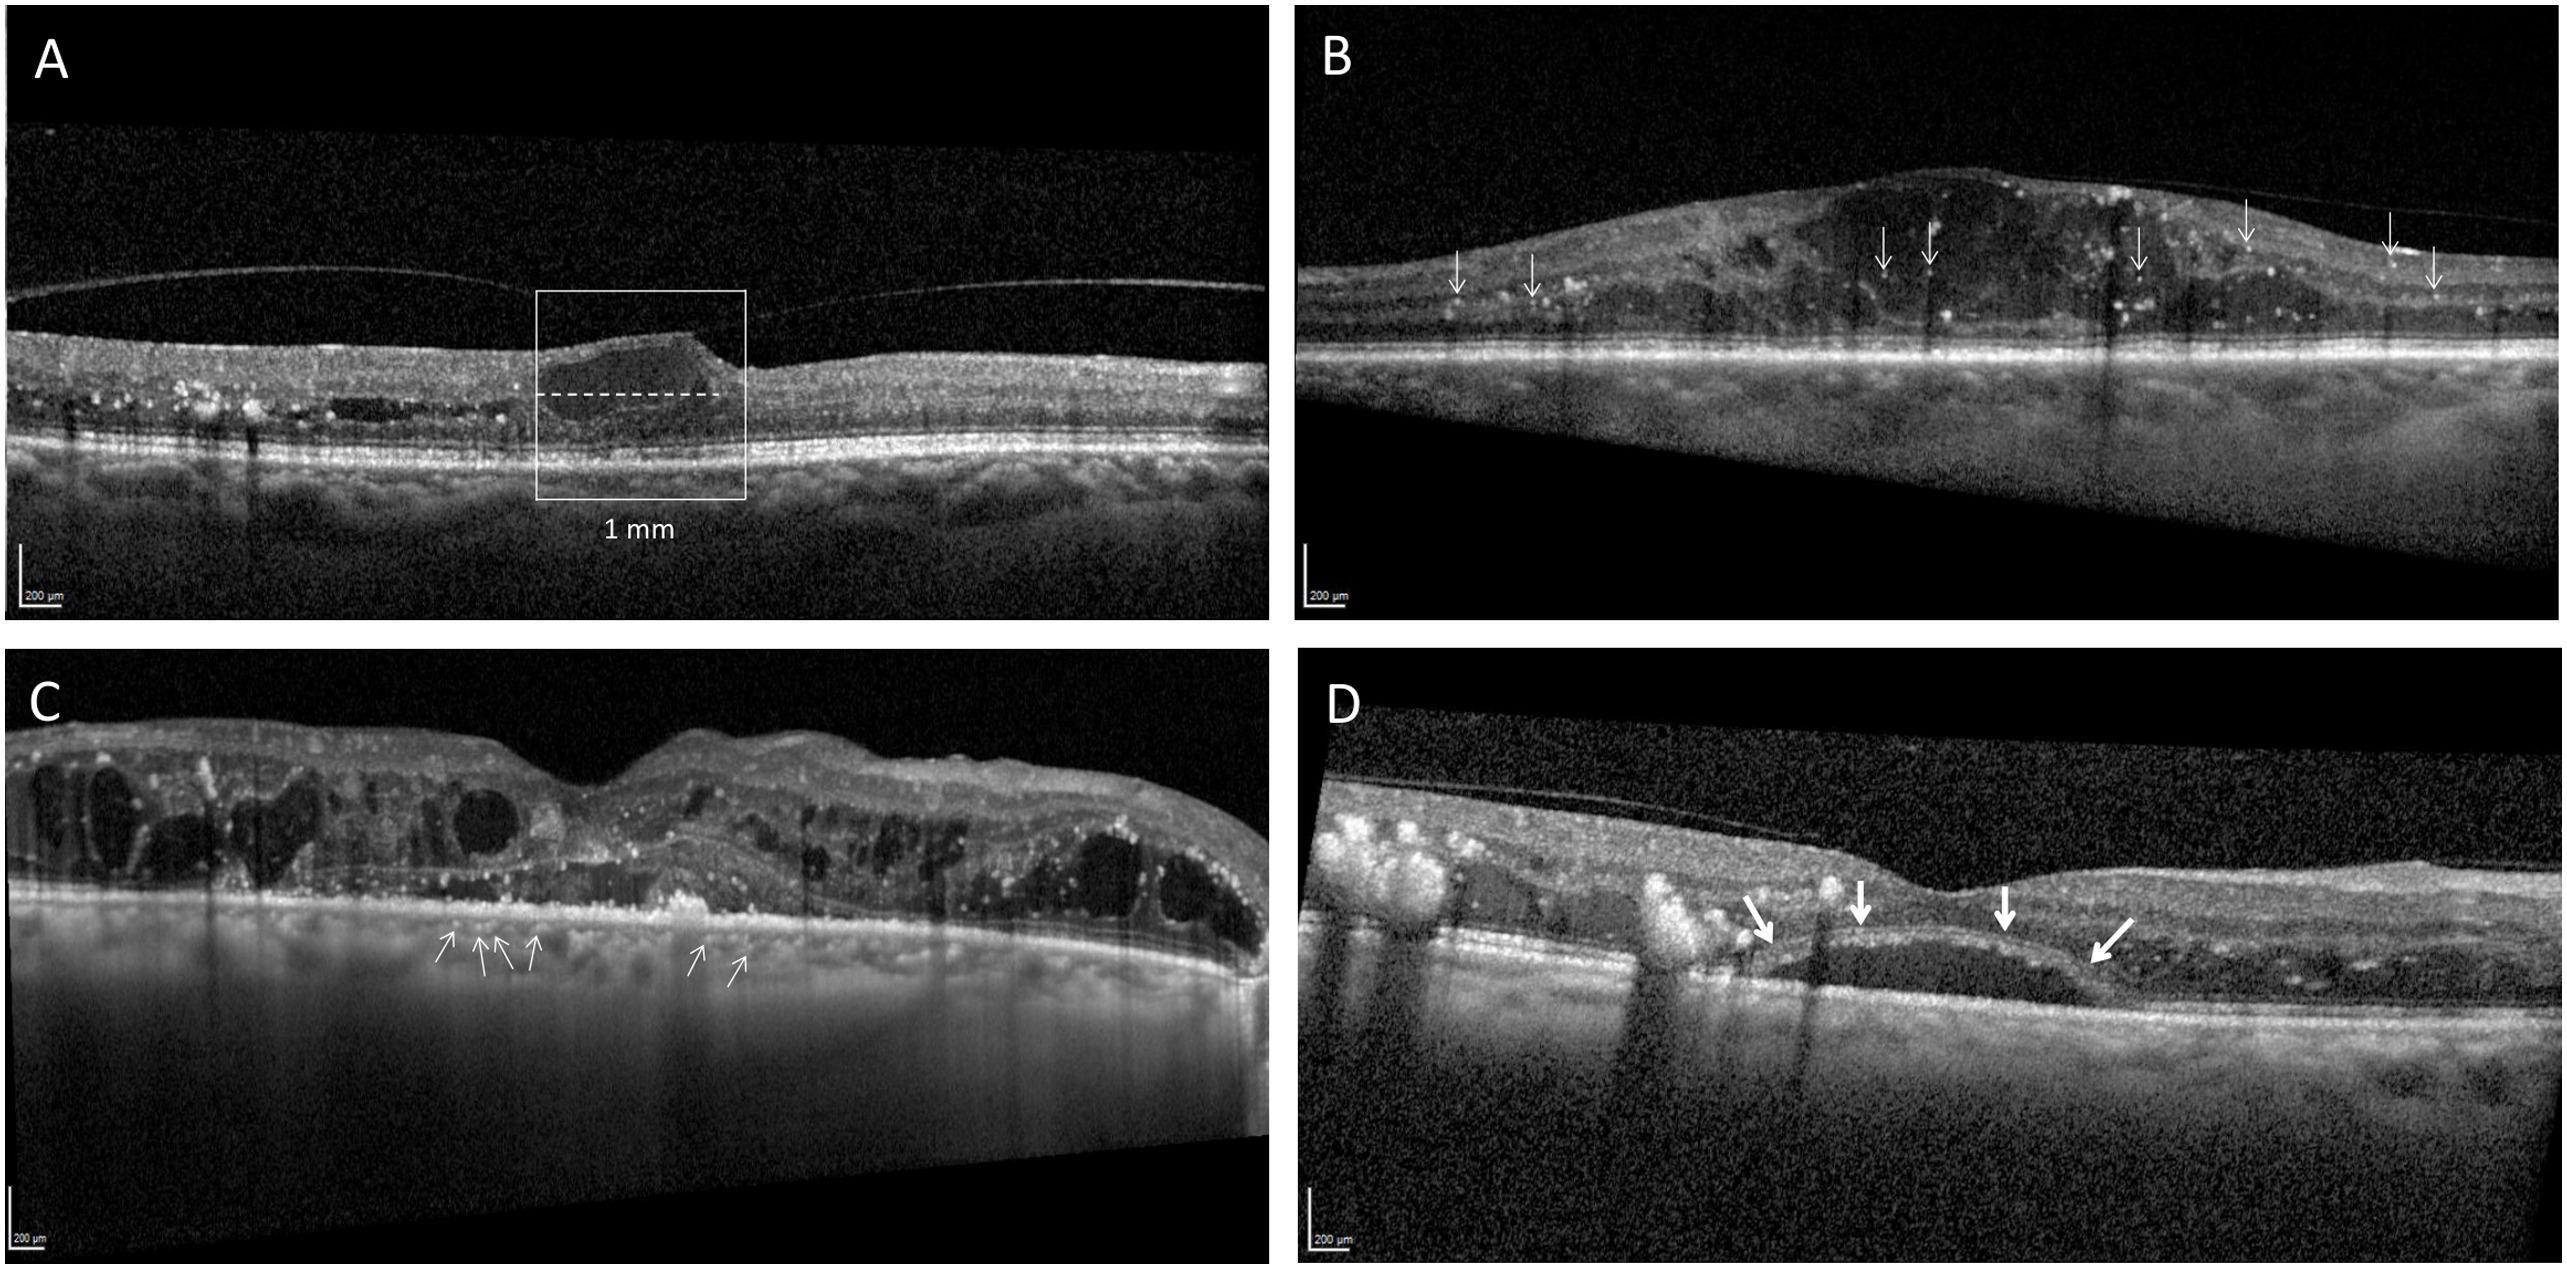 Researchers suggest that male DME patients may require greater vigilance than women, owning to their more inflammatory response to the condition. This image from the study shows several inflammation-related biomarkers with differential findings for men vs. women: (A) disorganization of retinal inner layers (B) retinal hyperreflective foci, (C) hyperreflective choroidal foci and (D) subfoveal neuroretinal detachment.